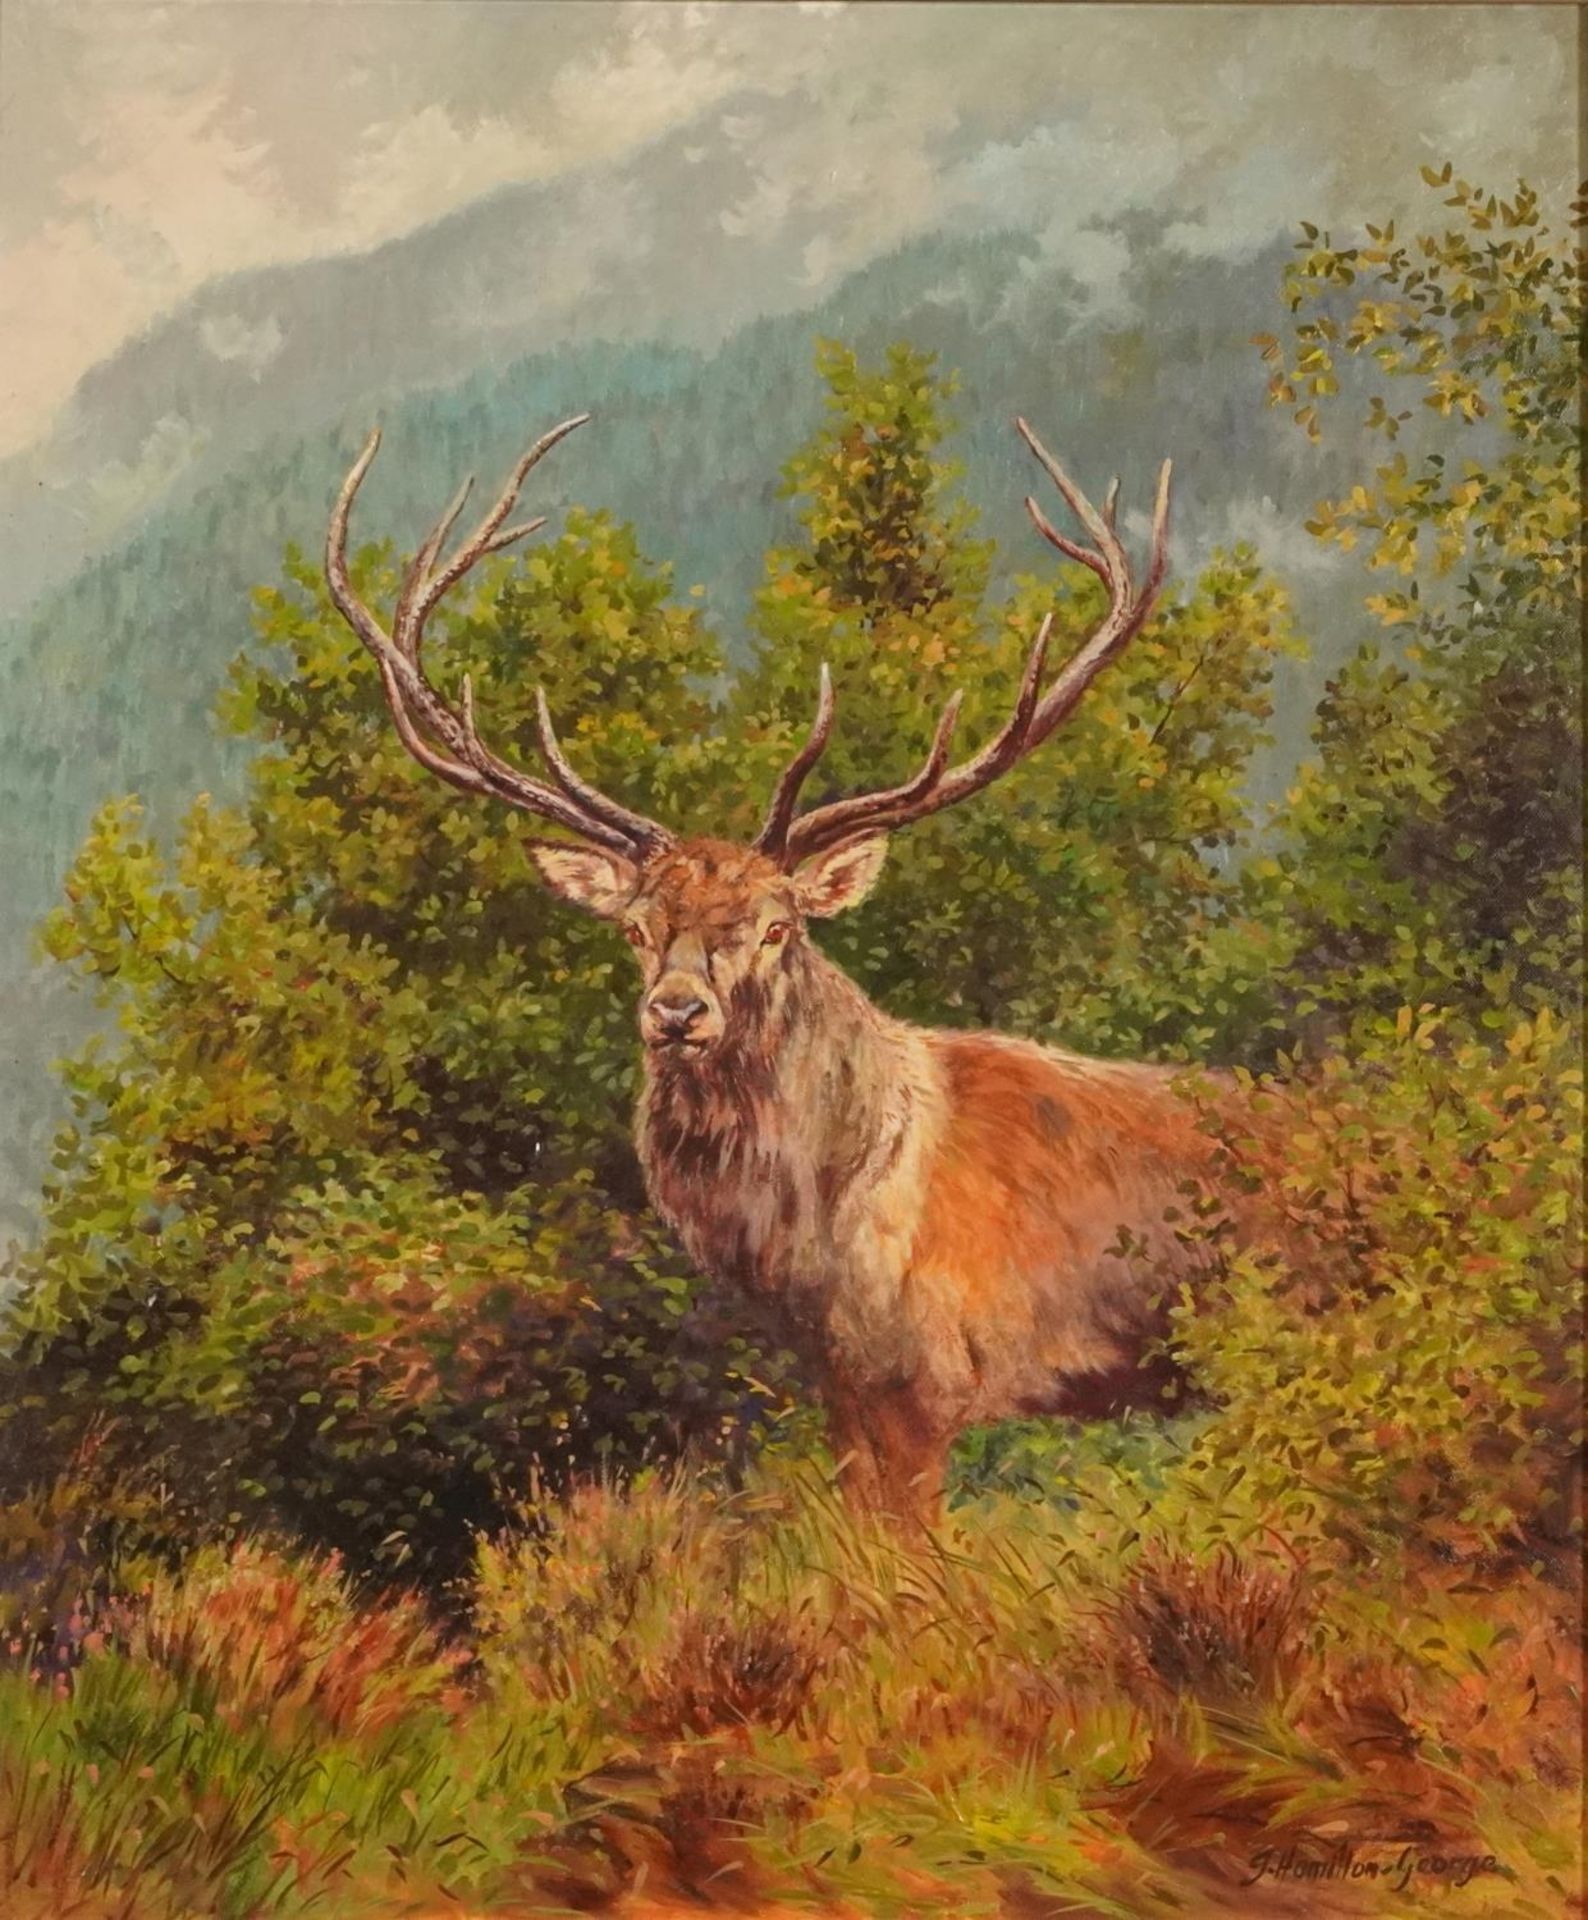 J Hamilton-George - Stag in a landscape, oil on canvas, mounted and framed, 60cm x 49.5cm